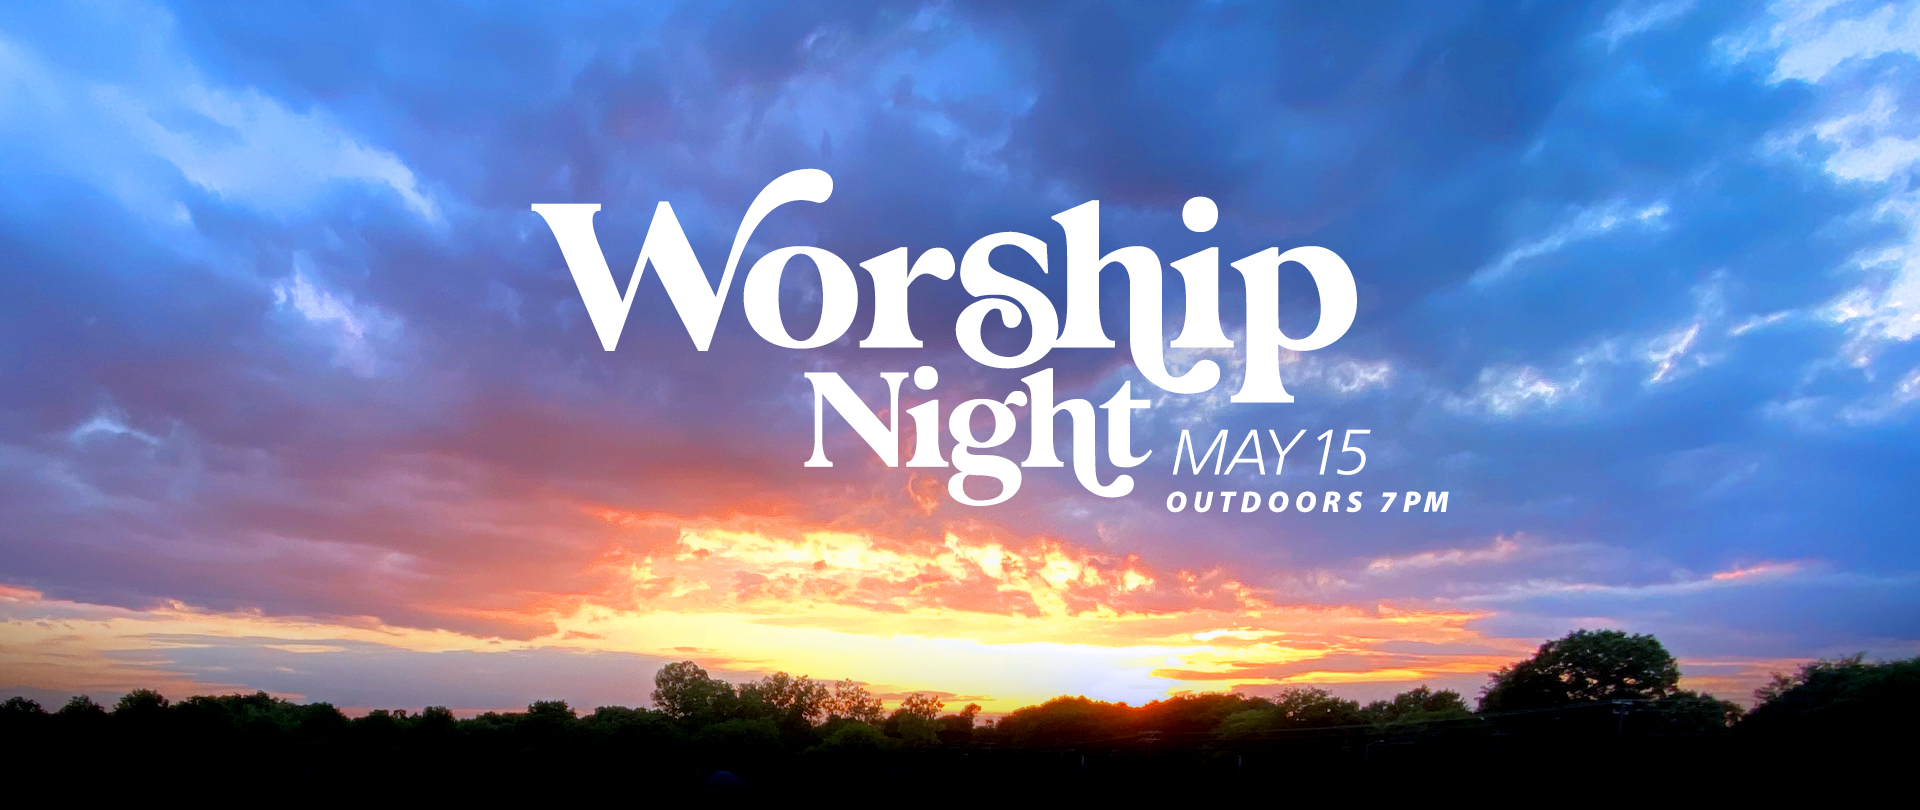 Worship Night
Sunday, May 15, at 7:00 PM
Outdoors on the soccer fields!
